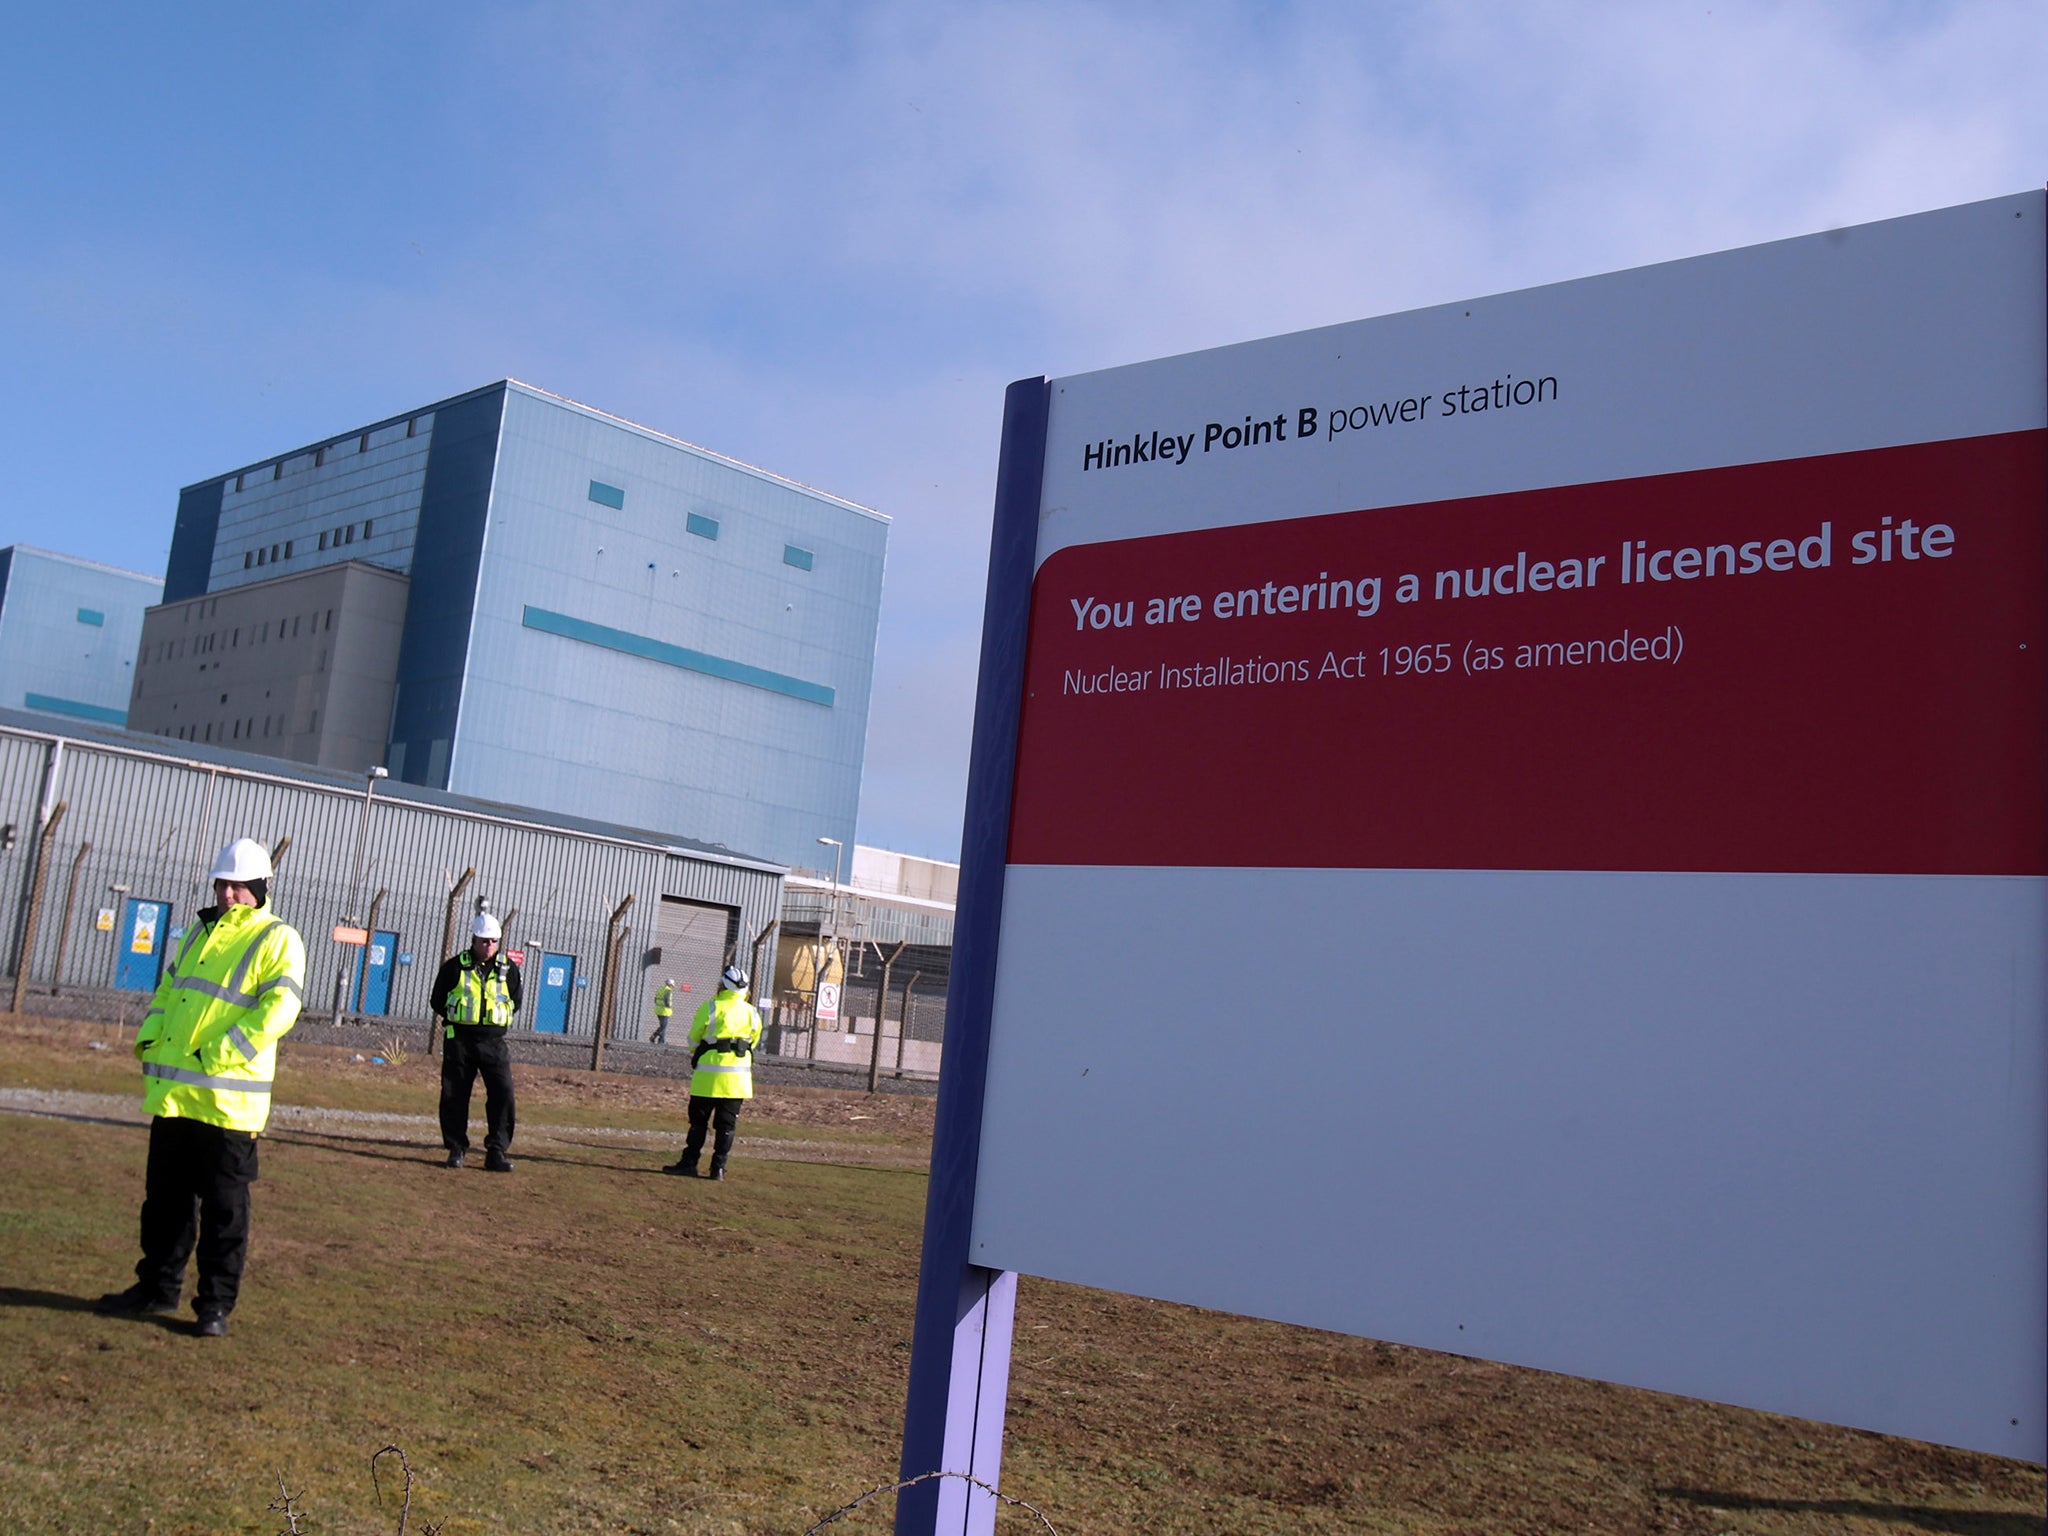 The controversial £24 billion reactor, enthusastically backed by David Cameron is now under review by Theresa May's Government